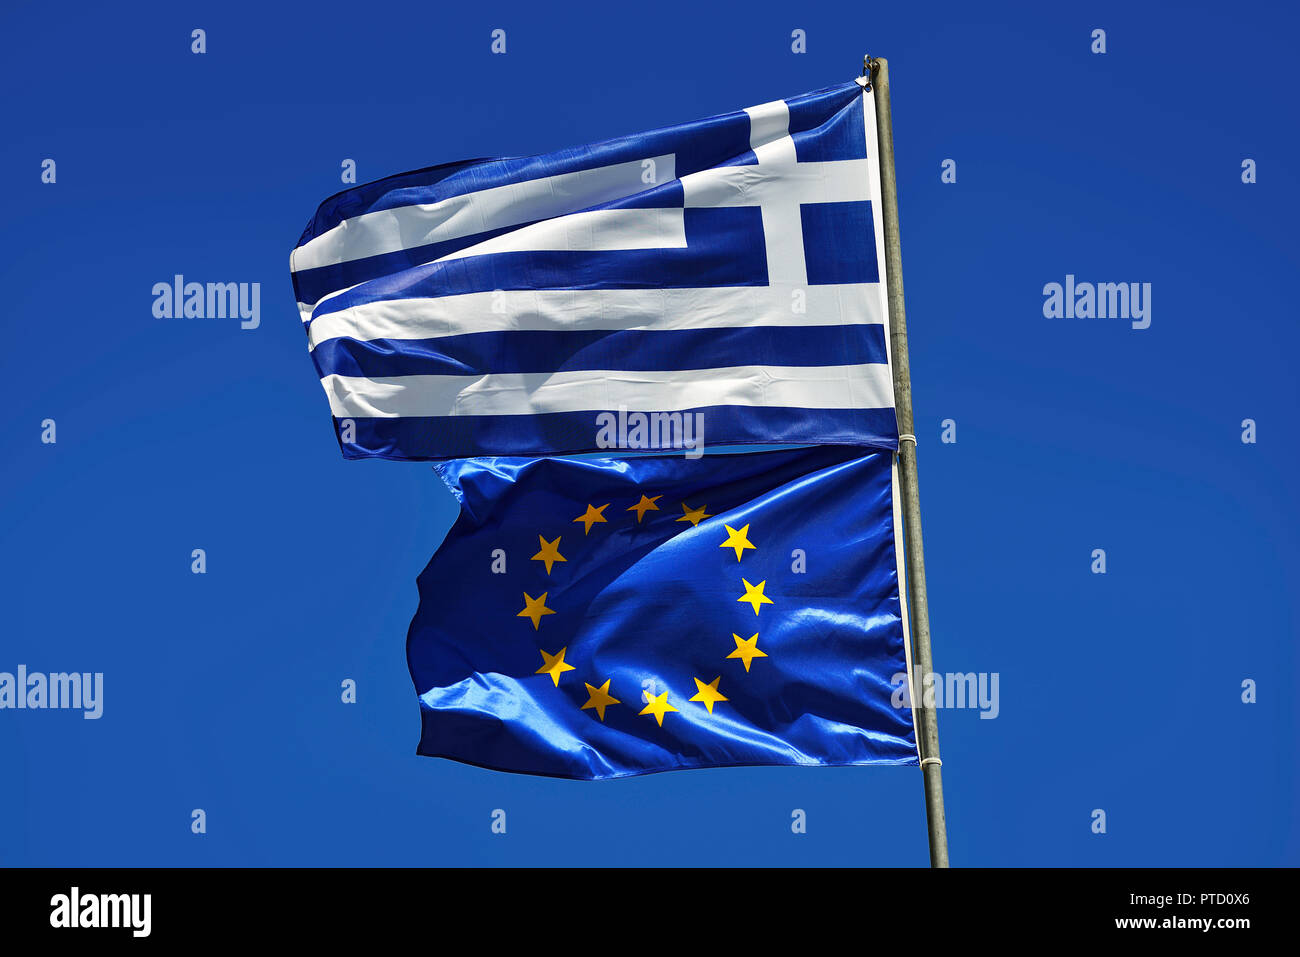 Greek flag and flag of the European Union flying in the wind, Crete, Greece Stock Photo